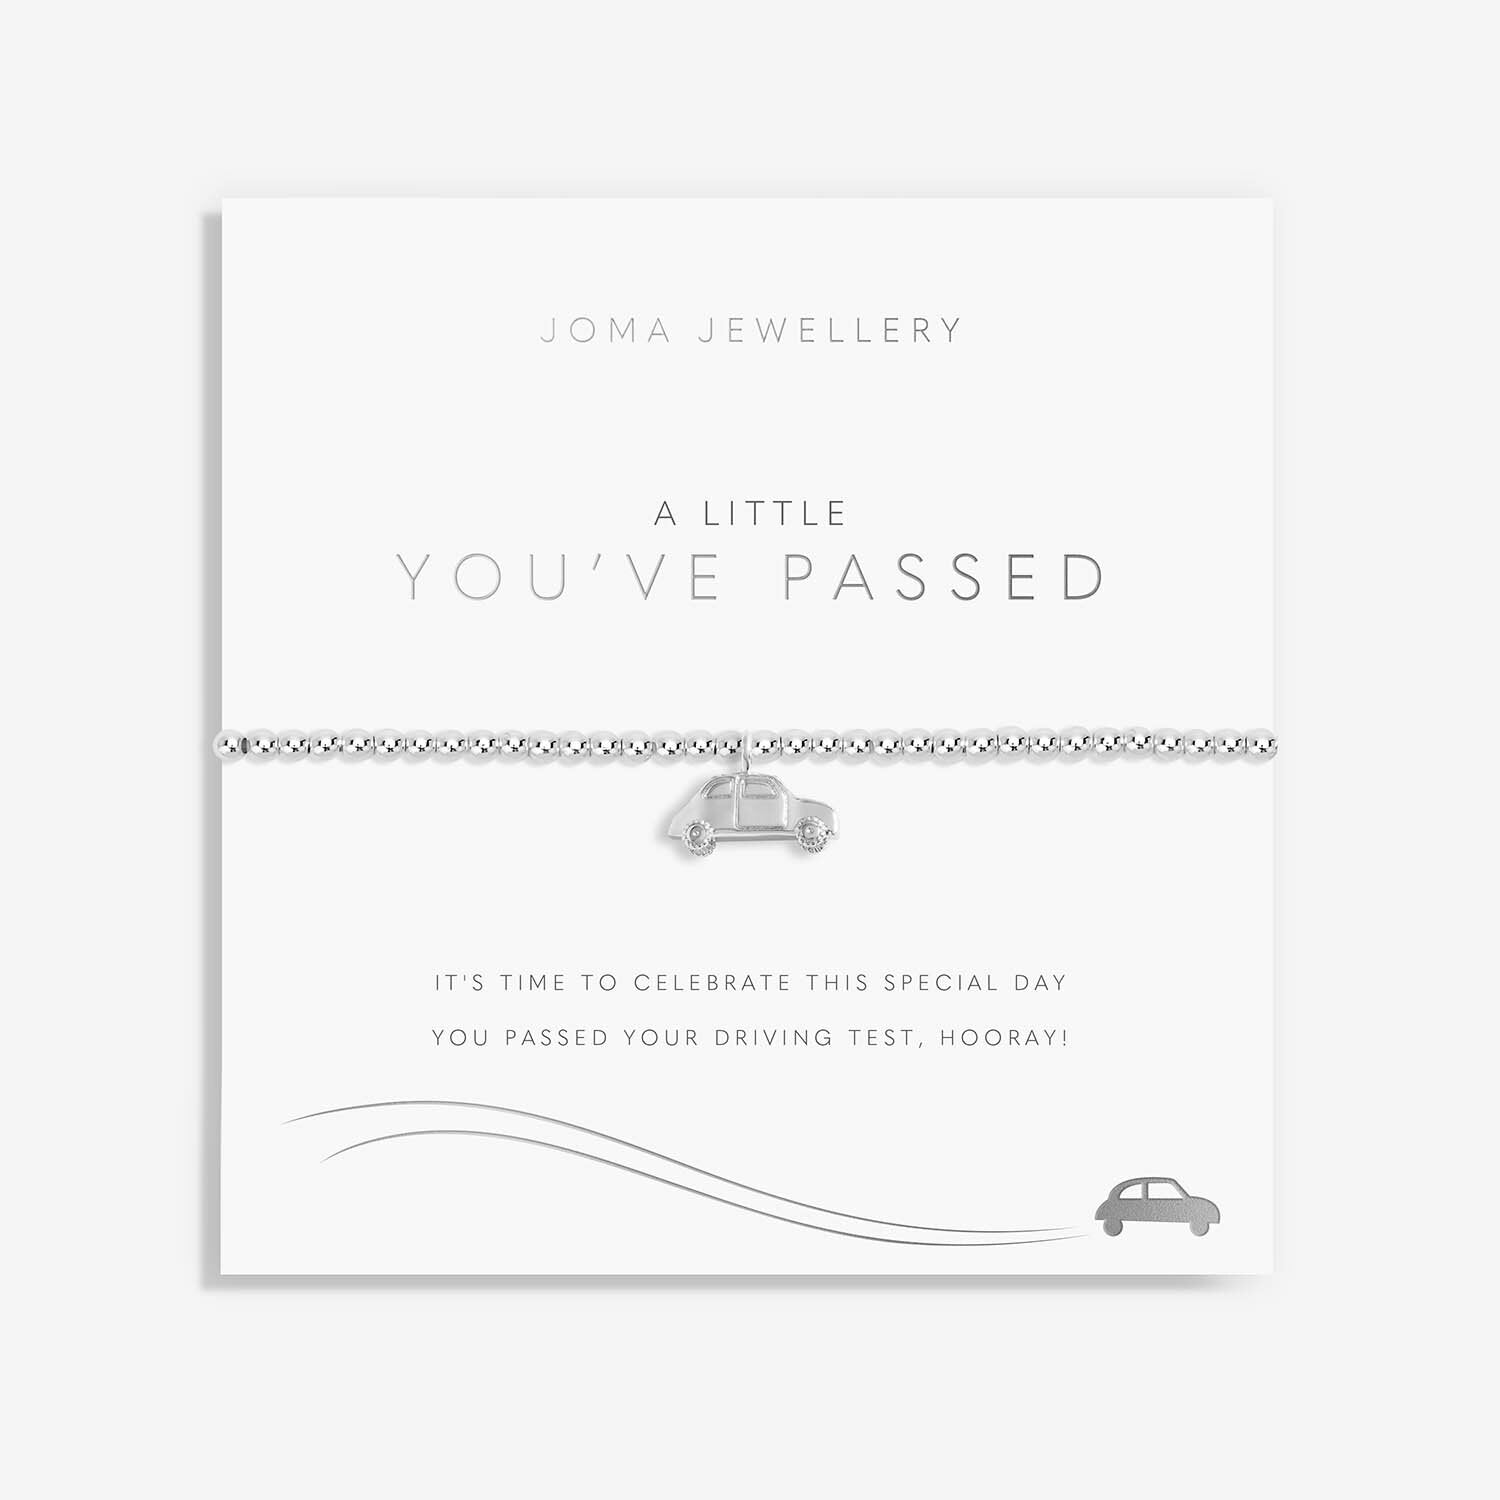 Joma Jewellery A Little 'You've Passed' Bracelet|More Than Just A Gift